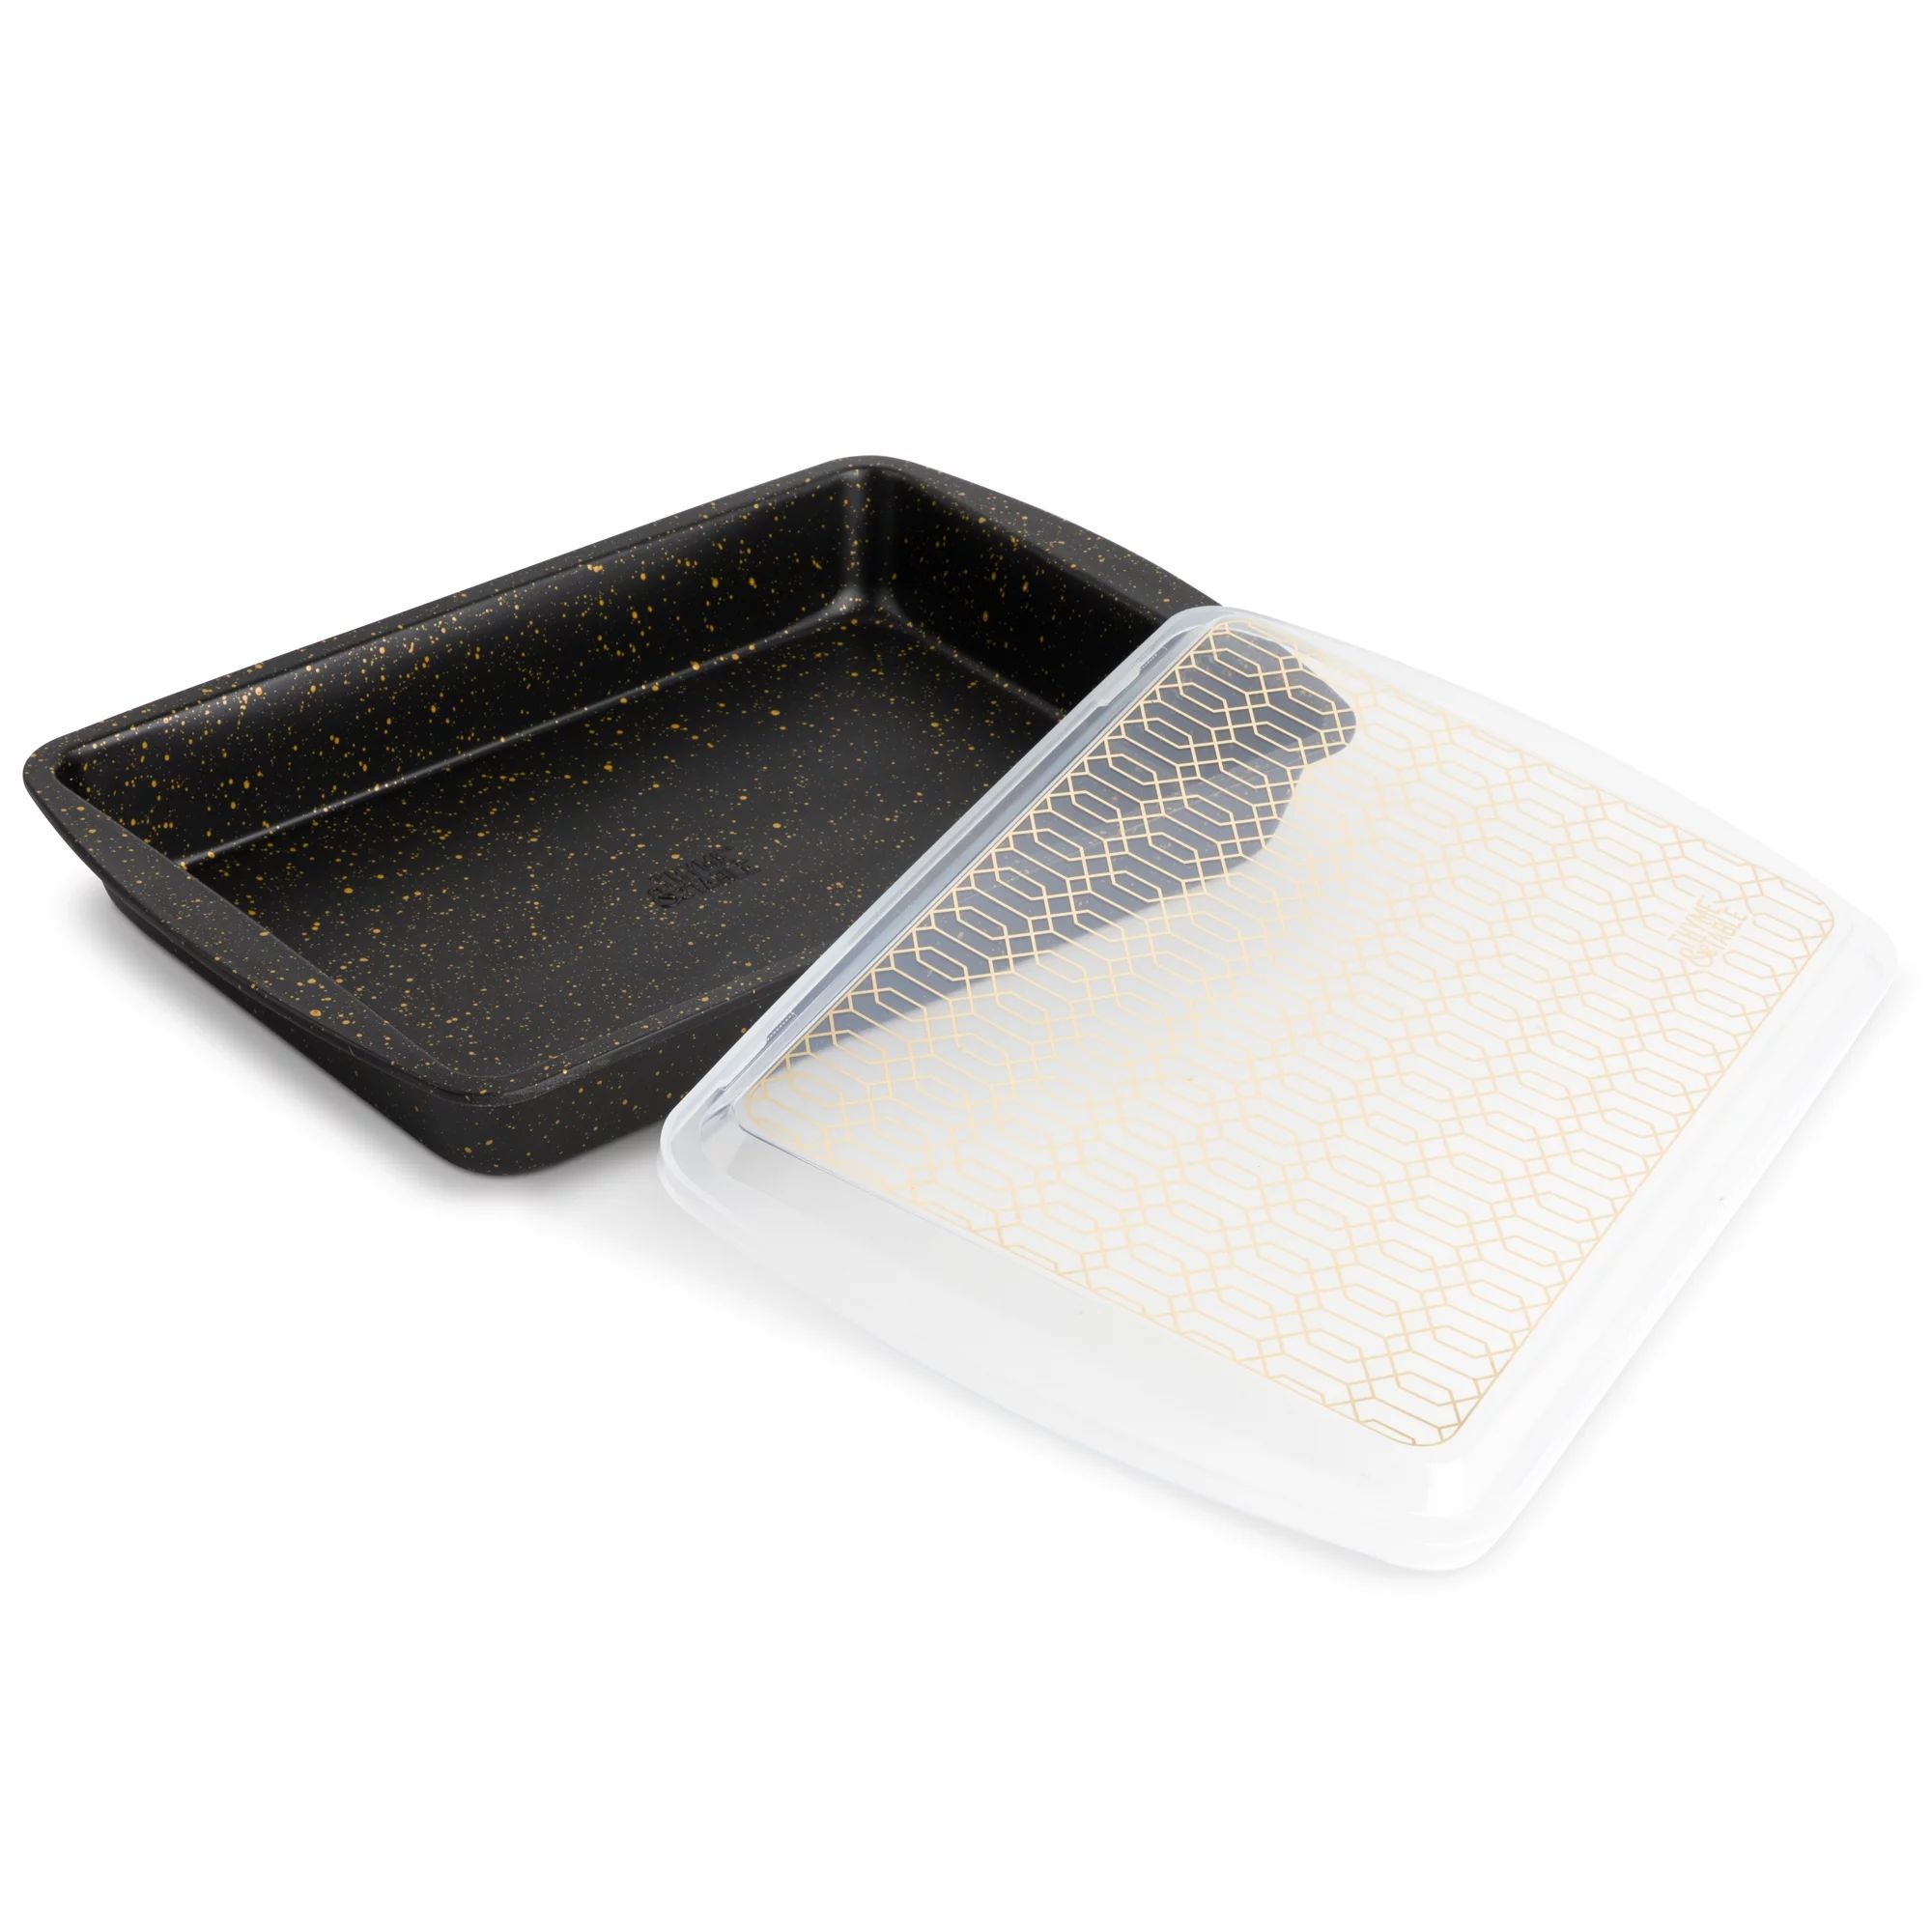 Thyme & Table Nonstick 9"x14" Cake Pan with Lid, Black | Walmart (US)